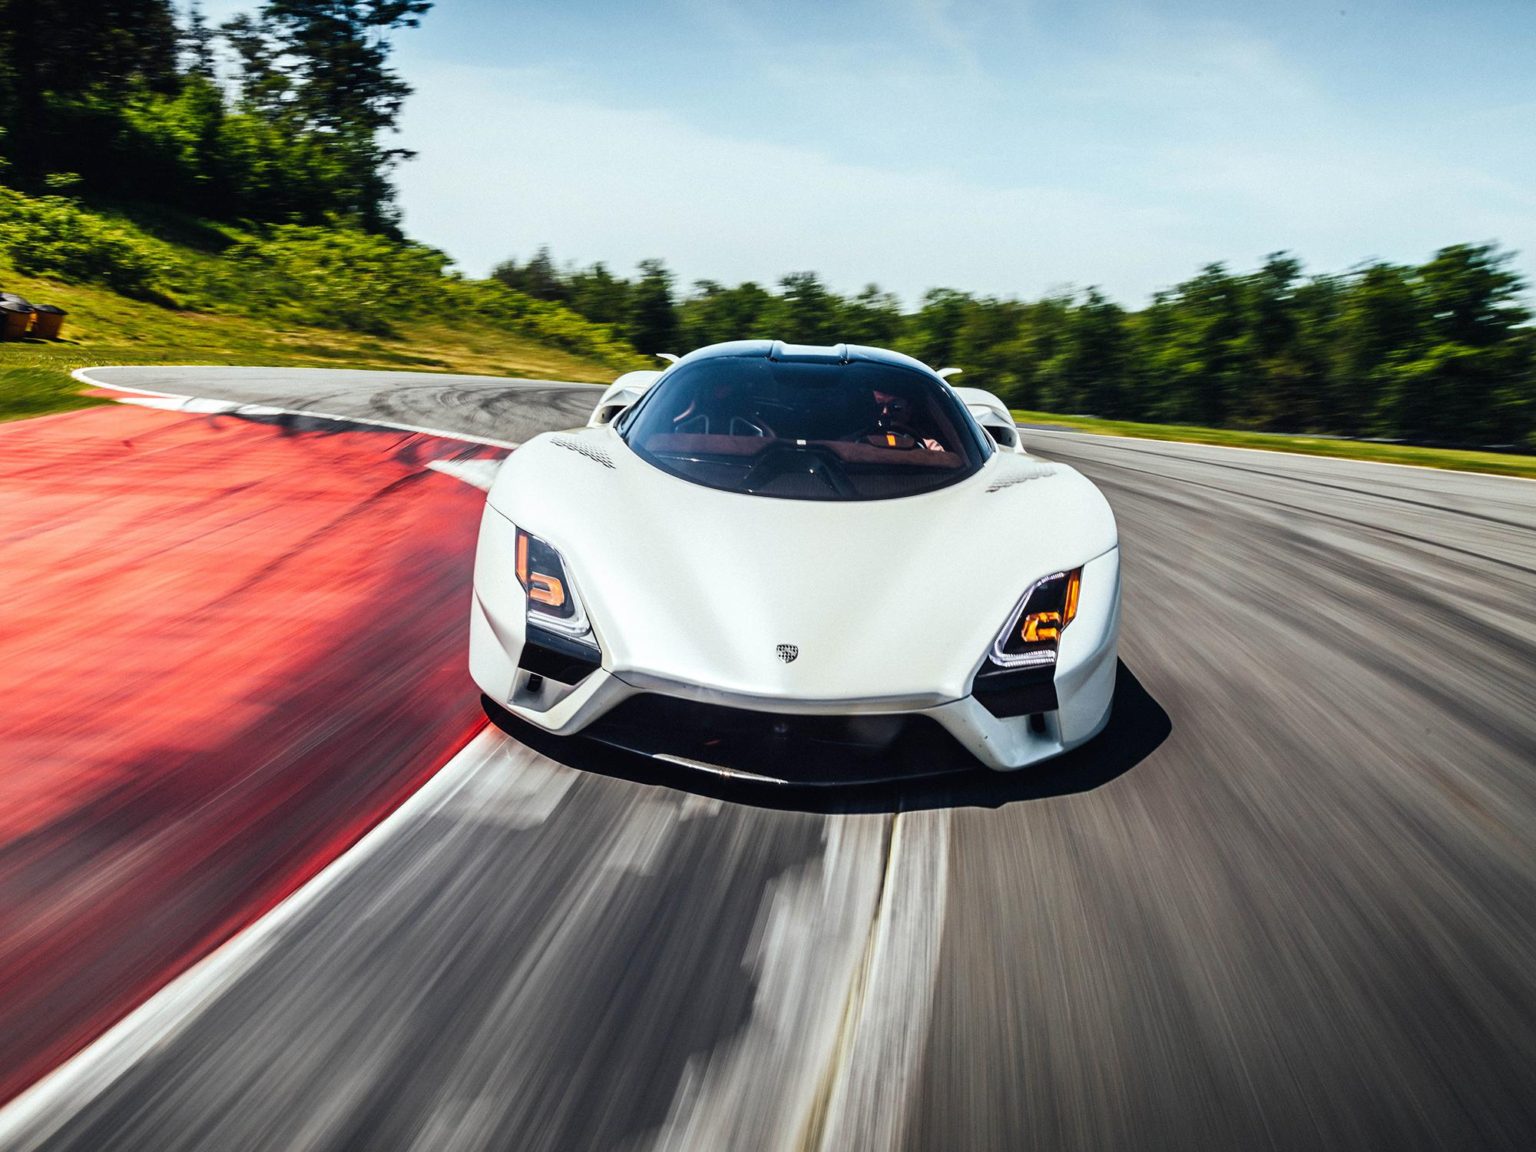 Some of the priciest cars available are also the fastest.